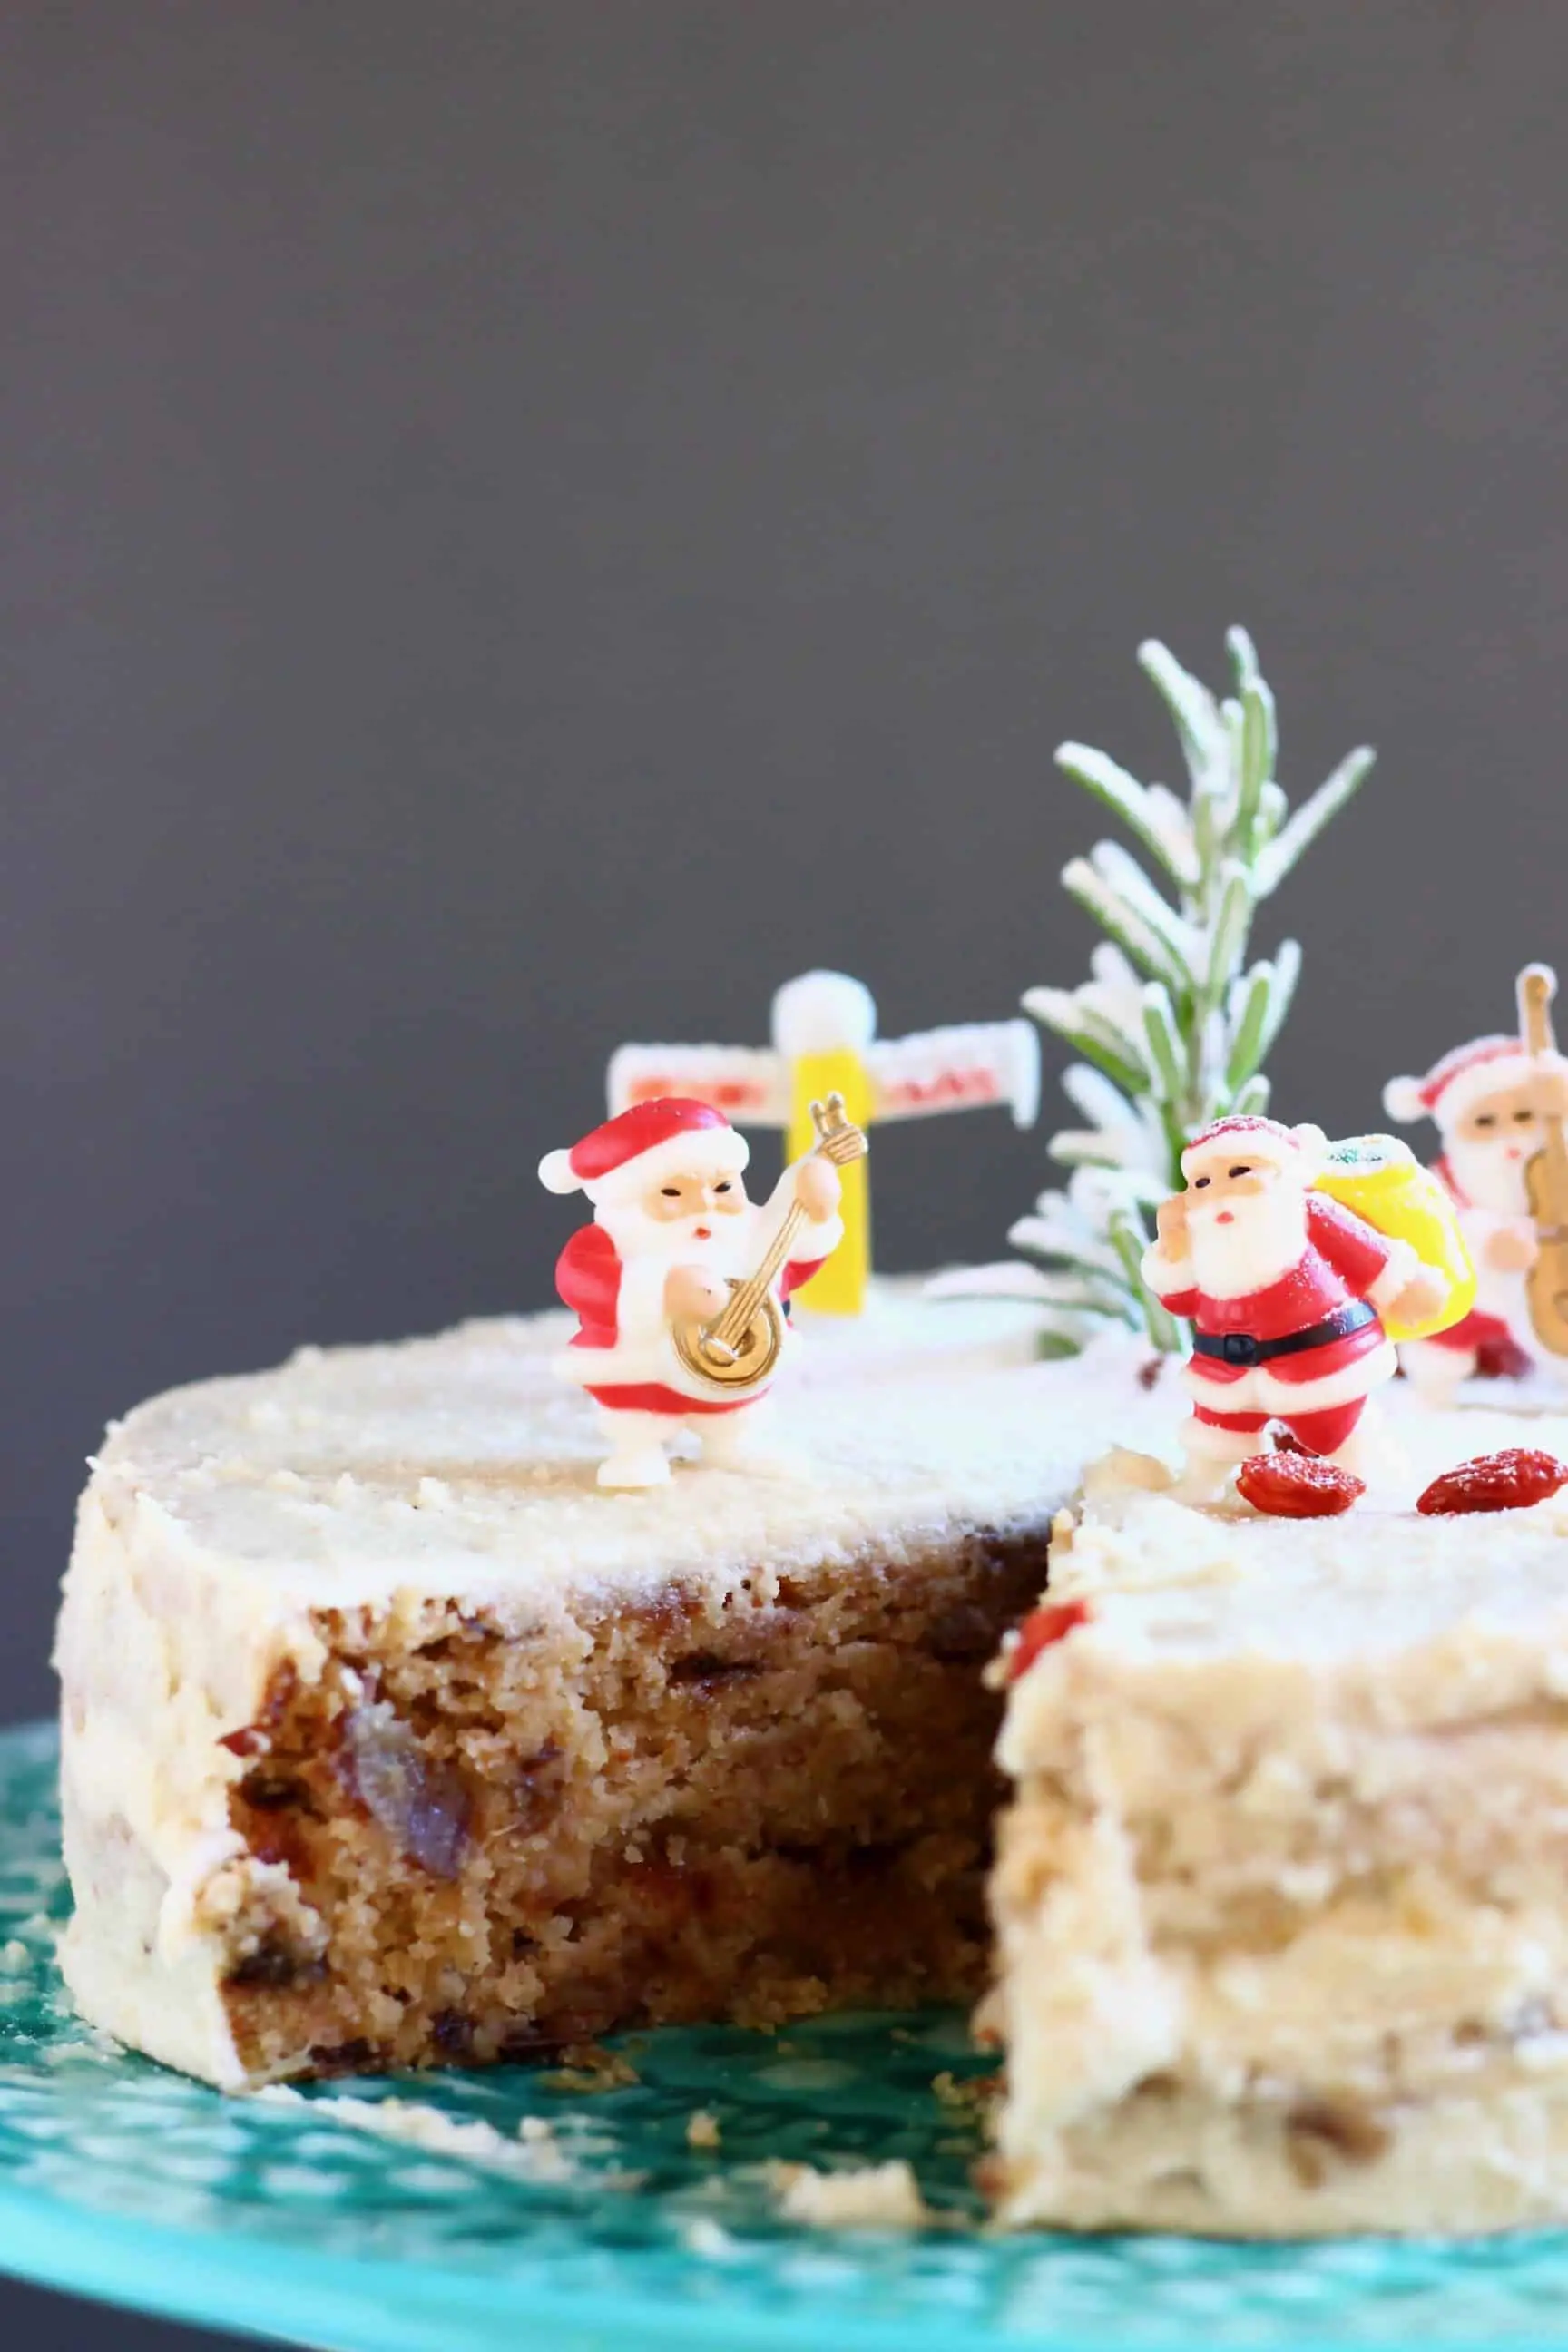 A Christmas fruit cake covered in white buttercream with a slice taken out of it topped with plastic santas against a grey background